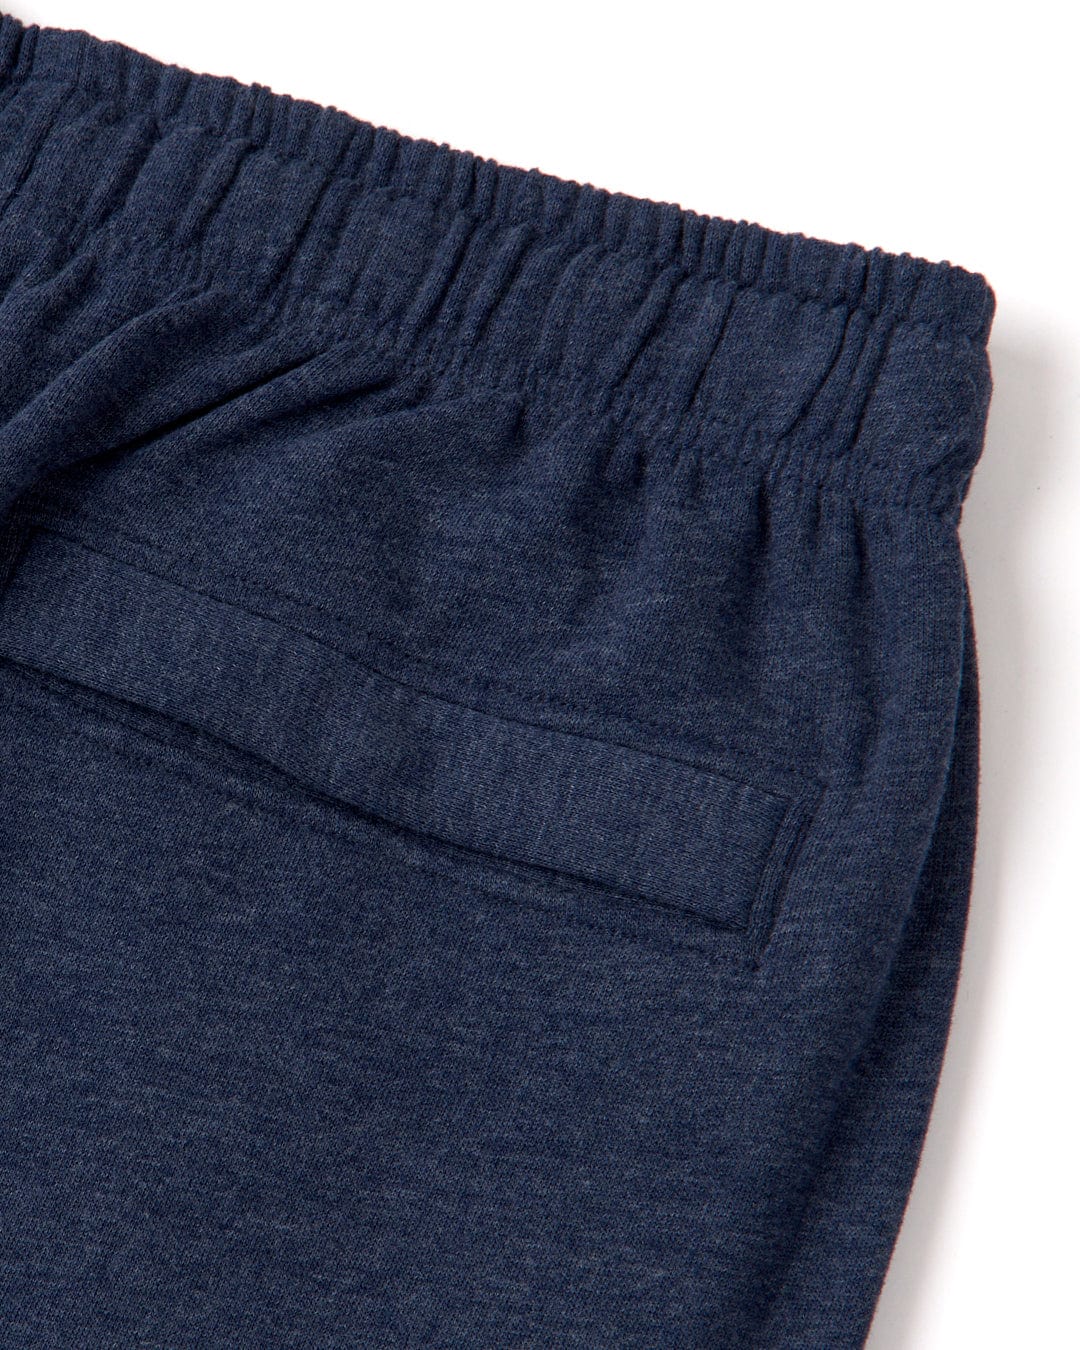 Saltrock Original - Mens Joggers - Blue Marl crafted from soft jersey material with elastic waistband, cuffed ankles, and a single back pocket featuring Saltrock branding.